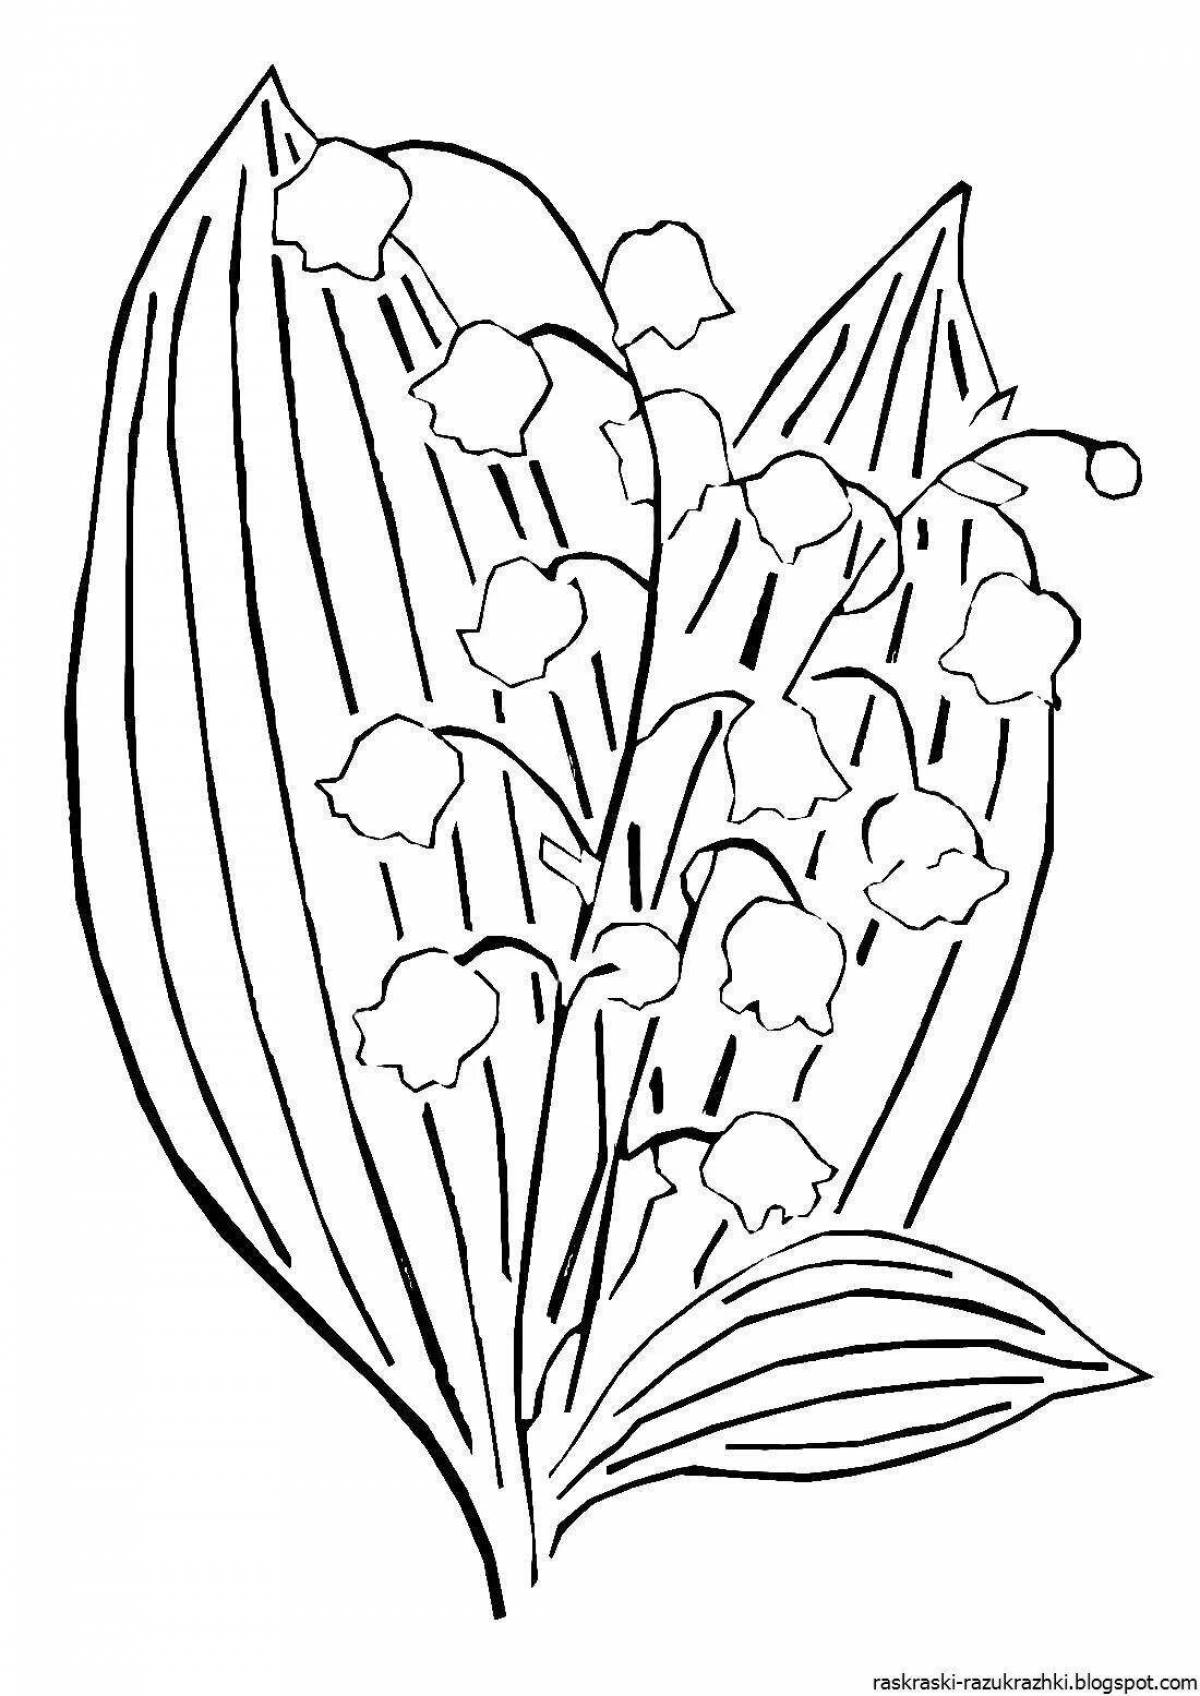 Inspirational lily of the valley coloring book for kids